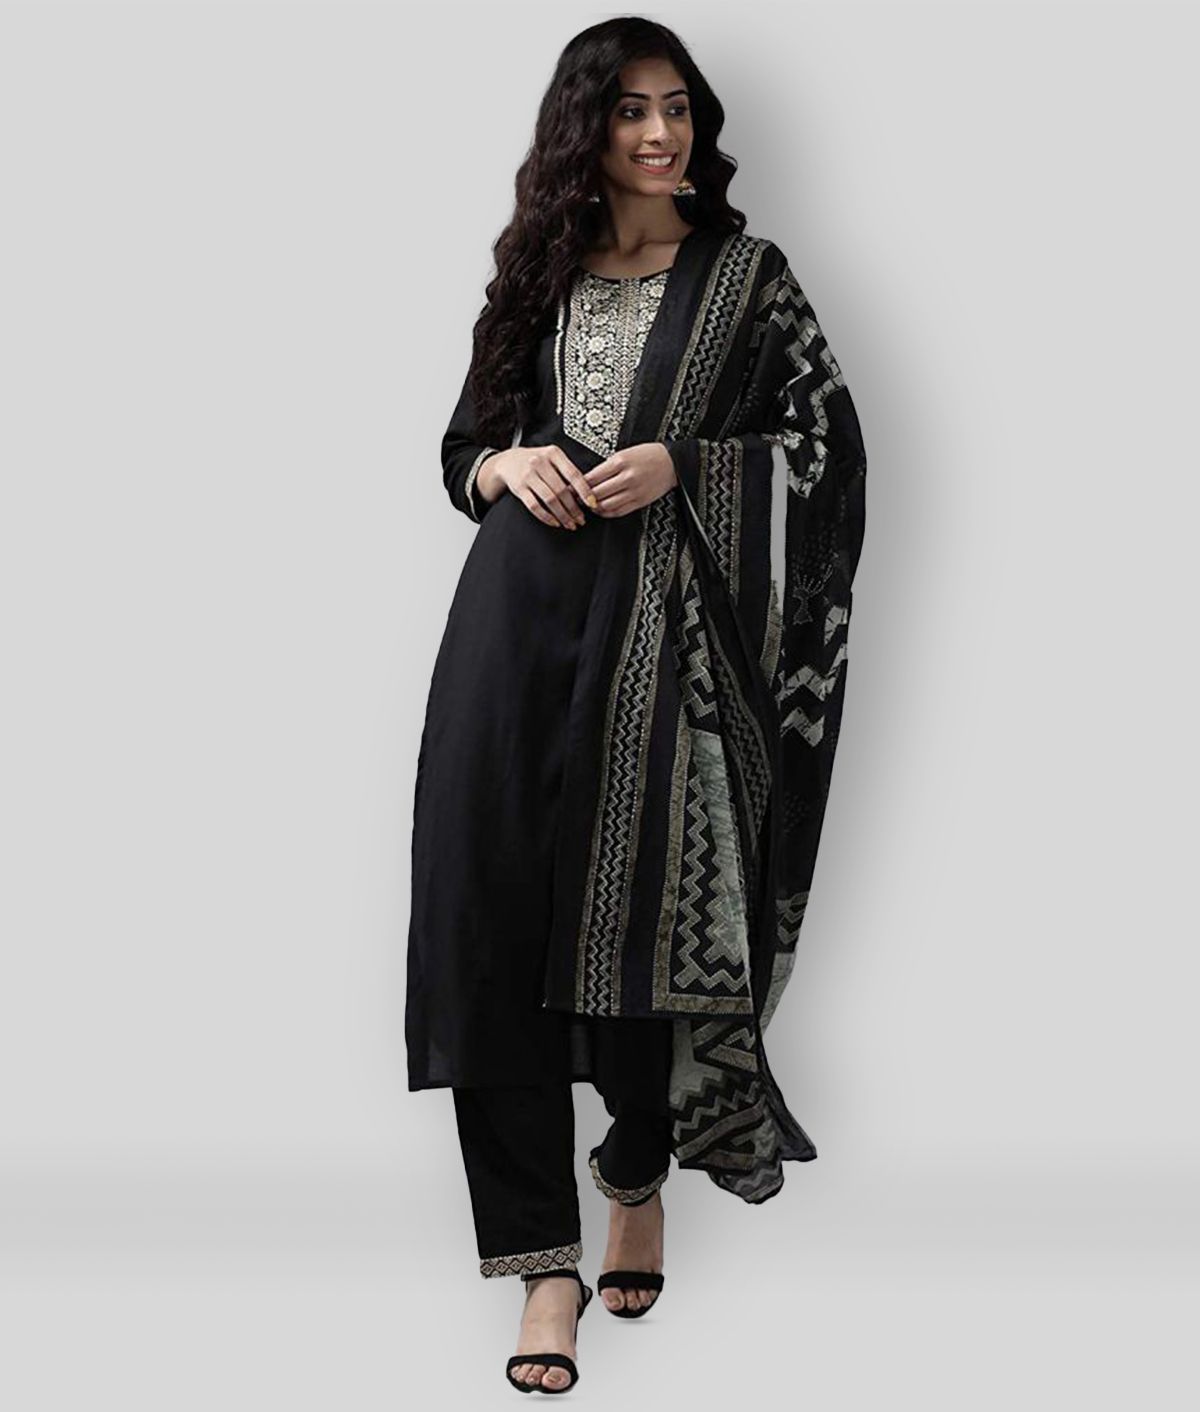     			Yufta - Black A-line Rayon Women's Stitched Salwar Suit ( Pack of 1 )